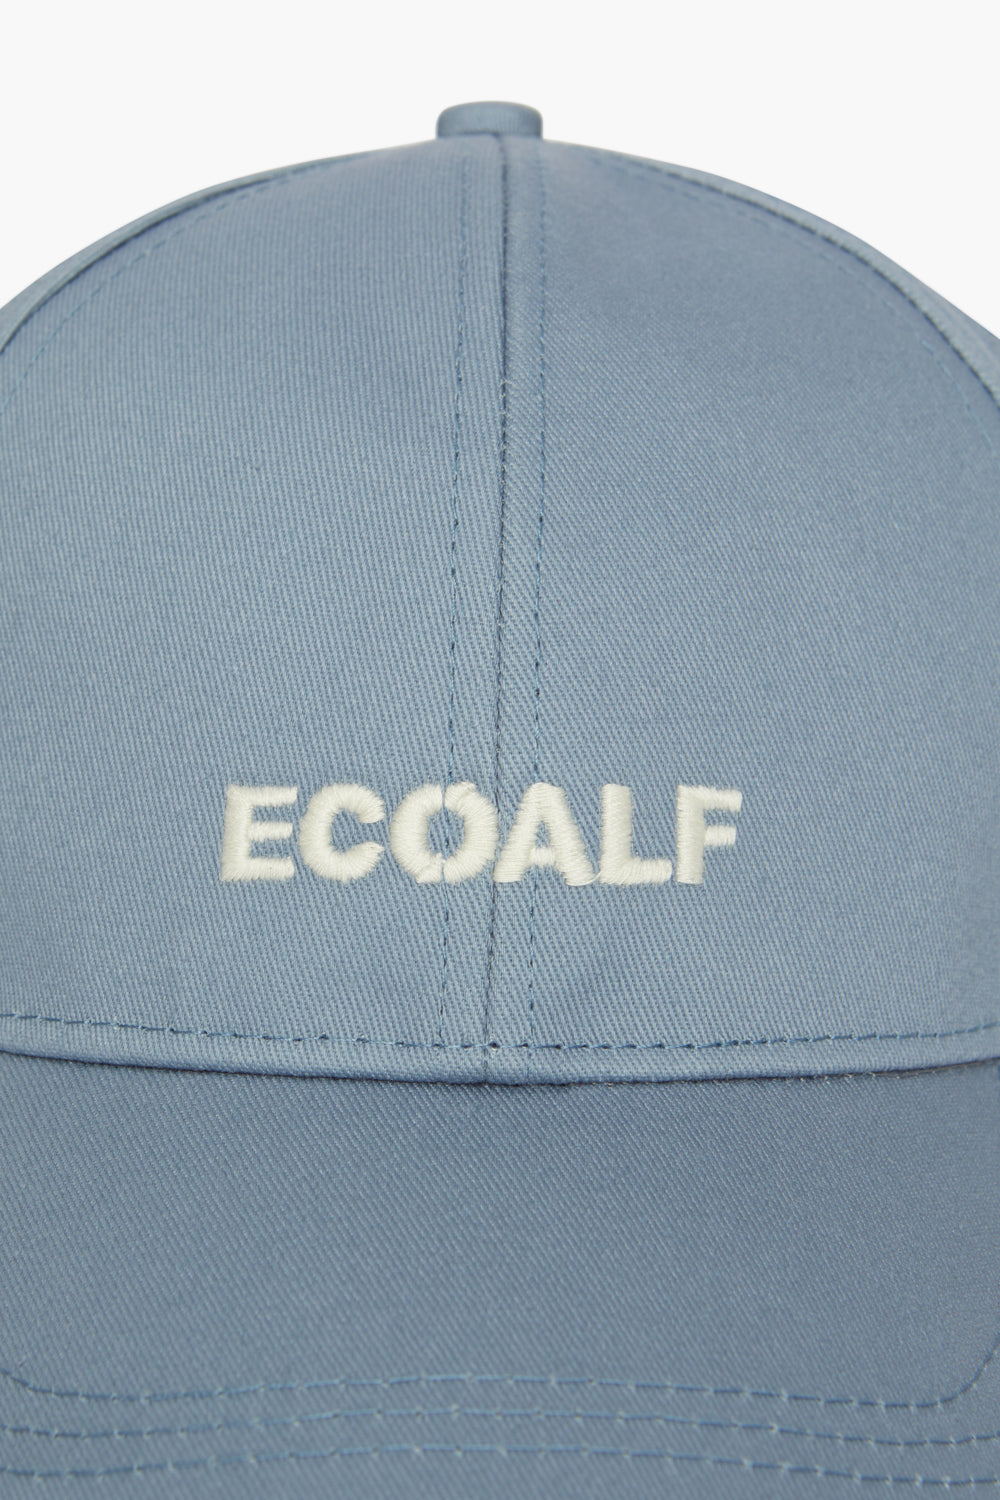 CASQUETTE EMBROIDERED BLEUE